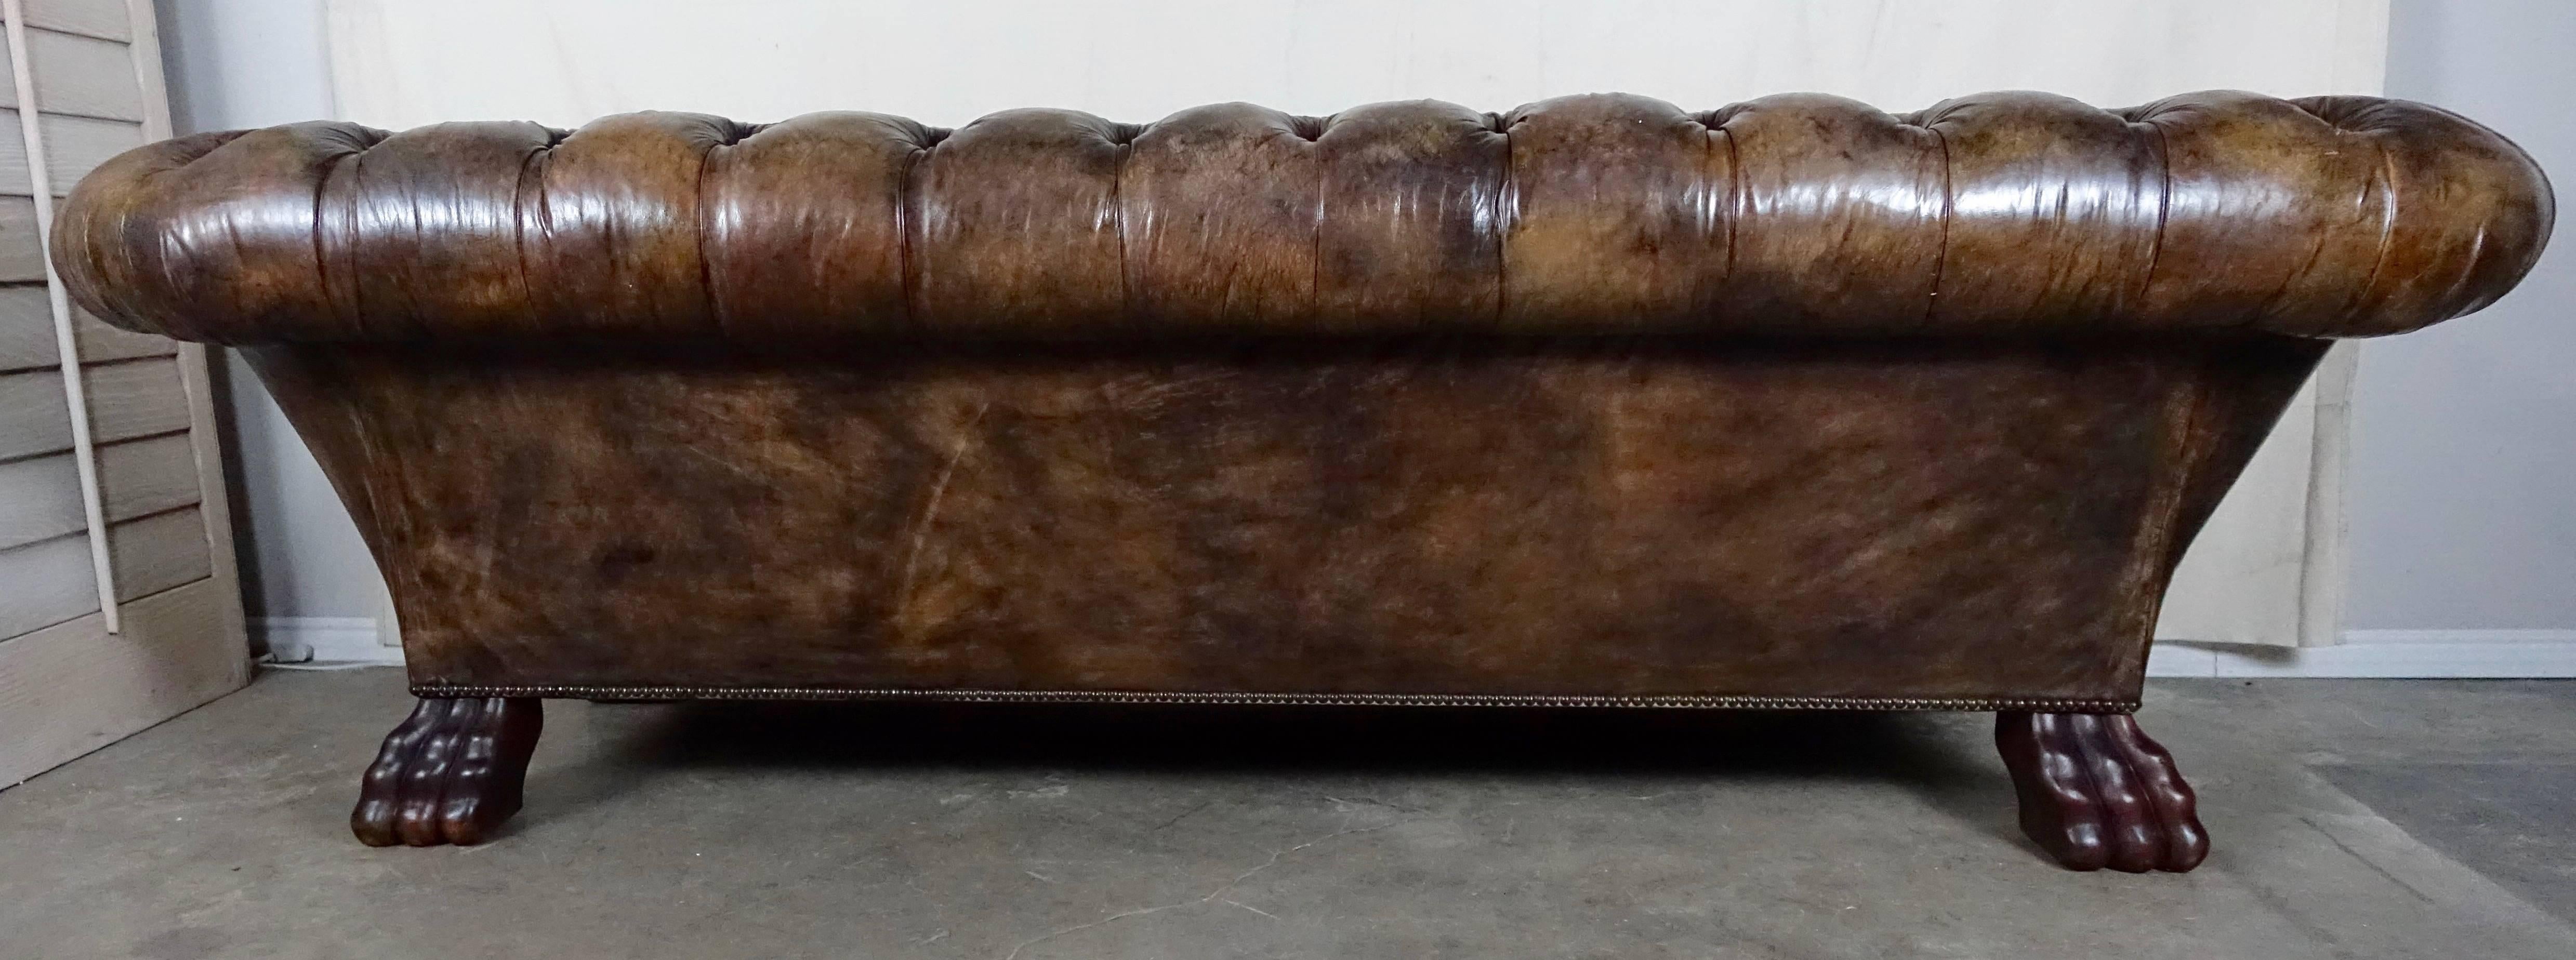 Hand-Carved English Leather Tufted Chesterfield Style Sofa with Paw Feet